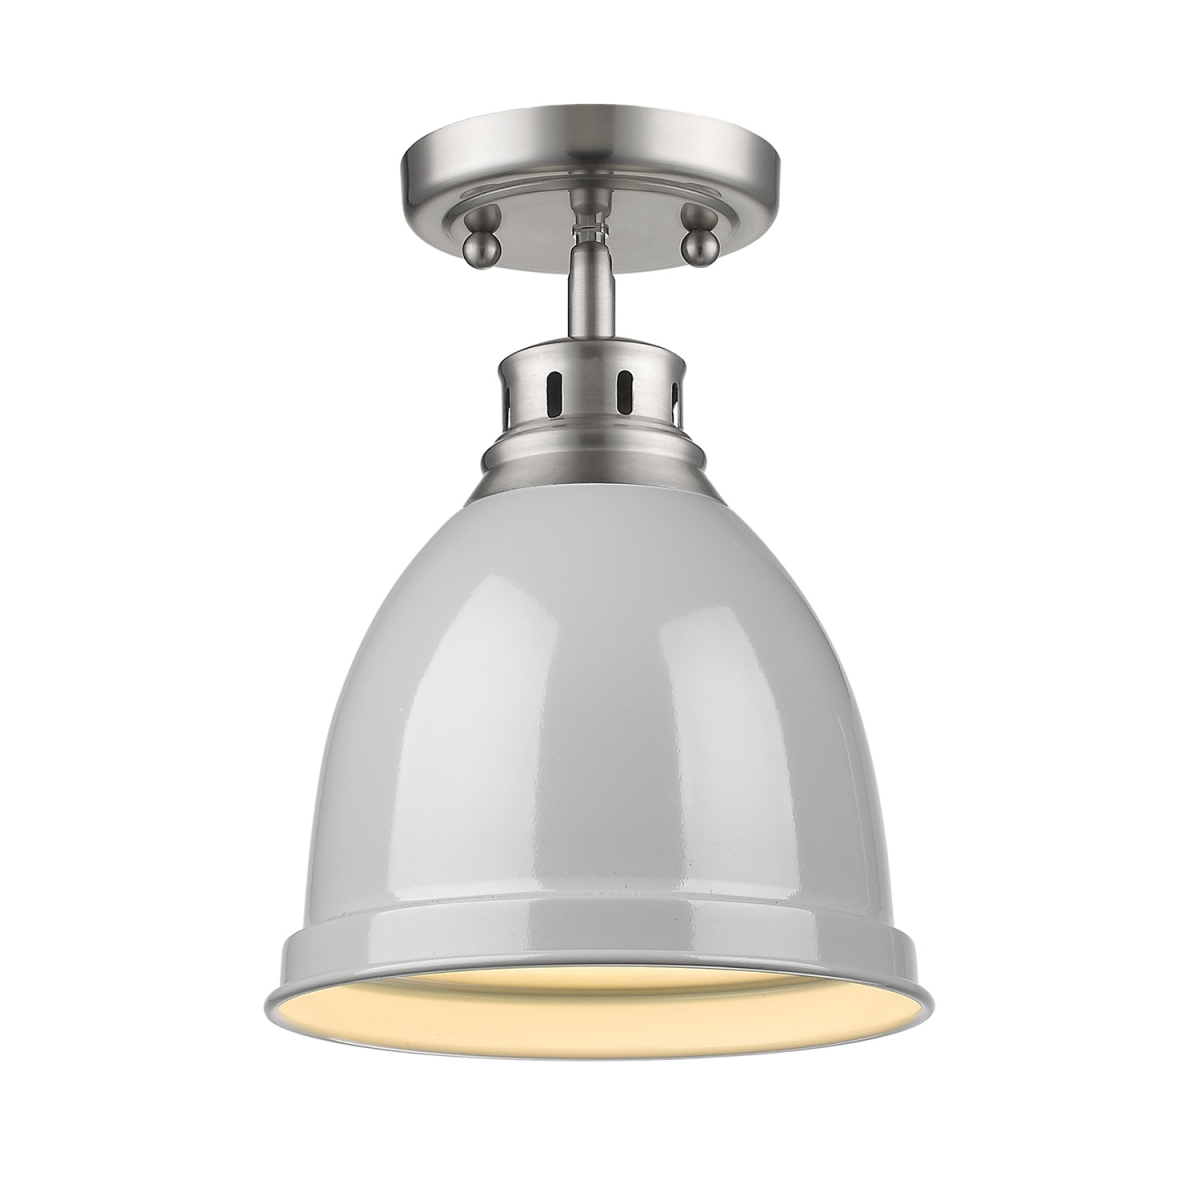 3602-fm Pw-gy Duncan Flush Mount Light With Gray Shade, Pewter